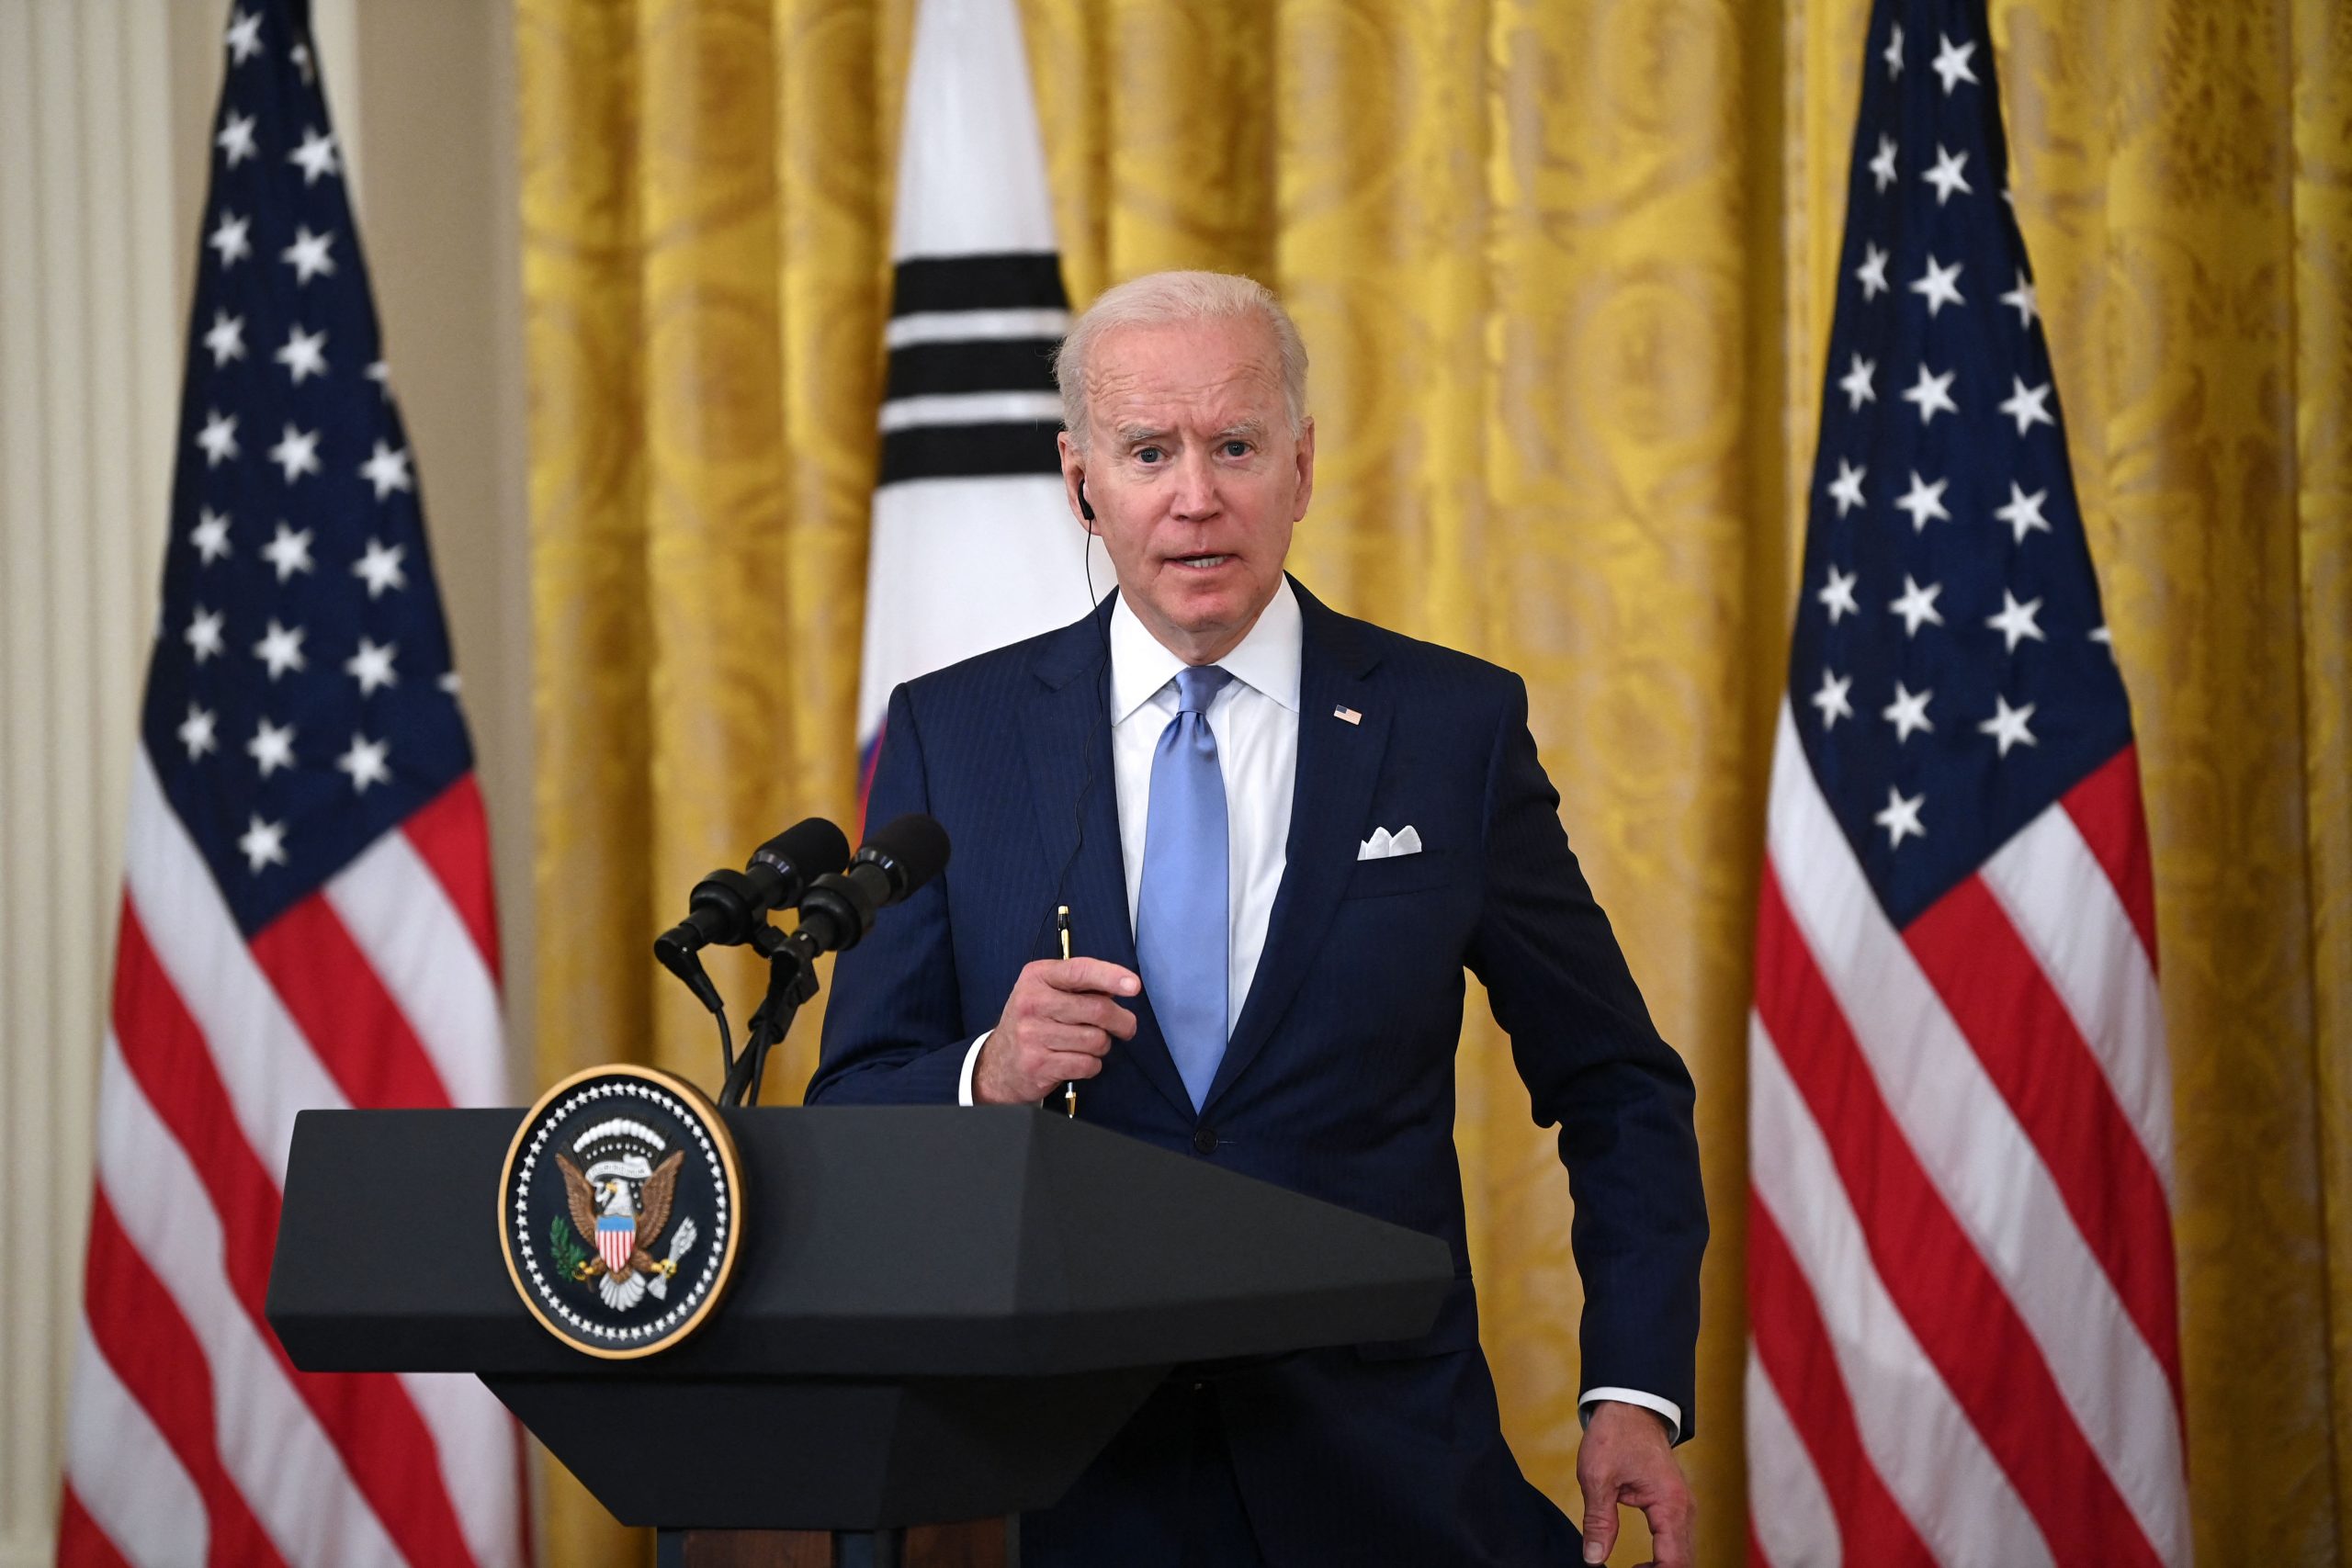 Joe Biden to sign executive order to promote competition within US economy